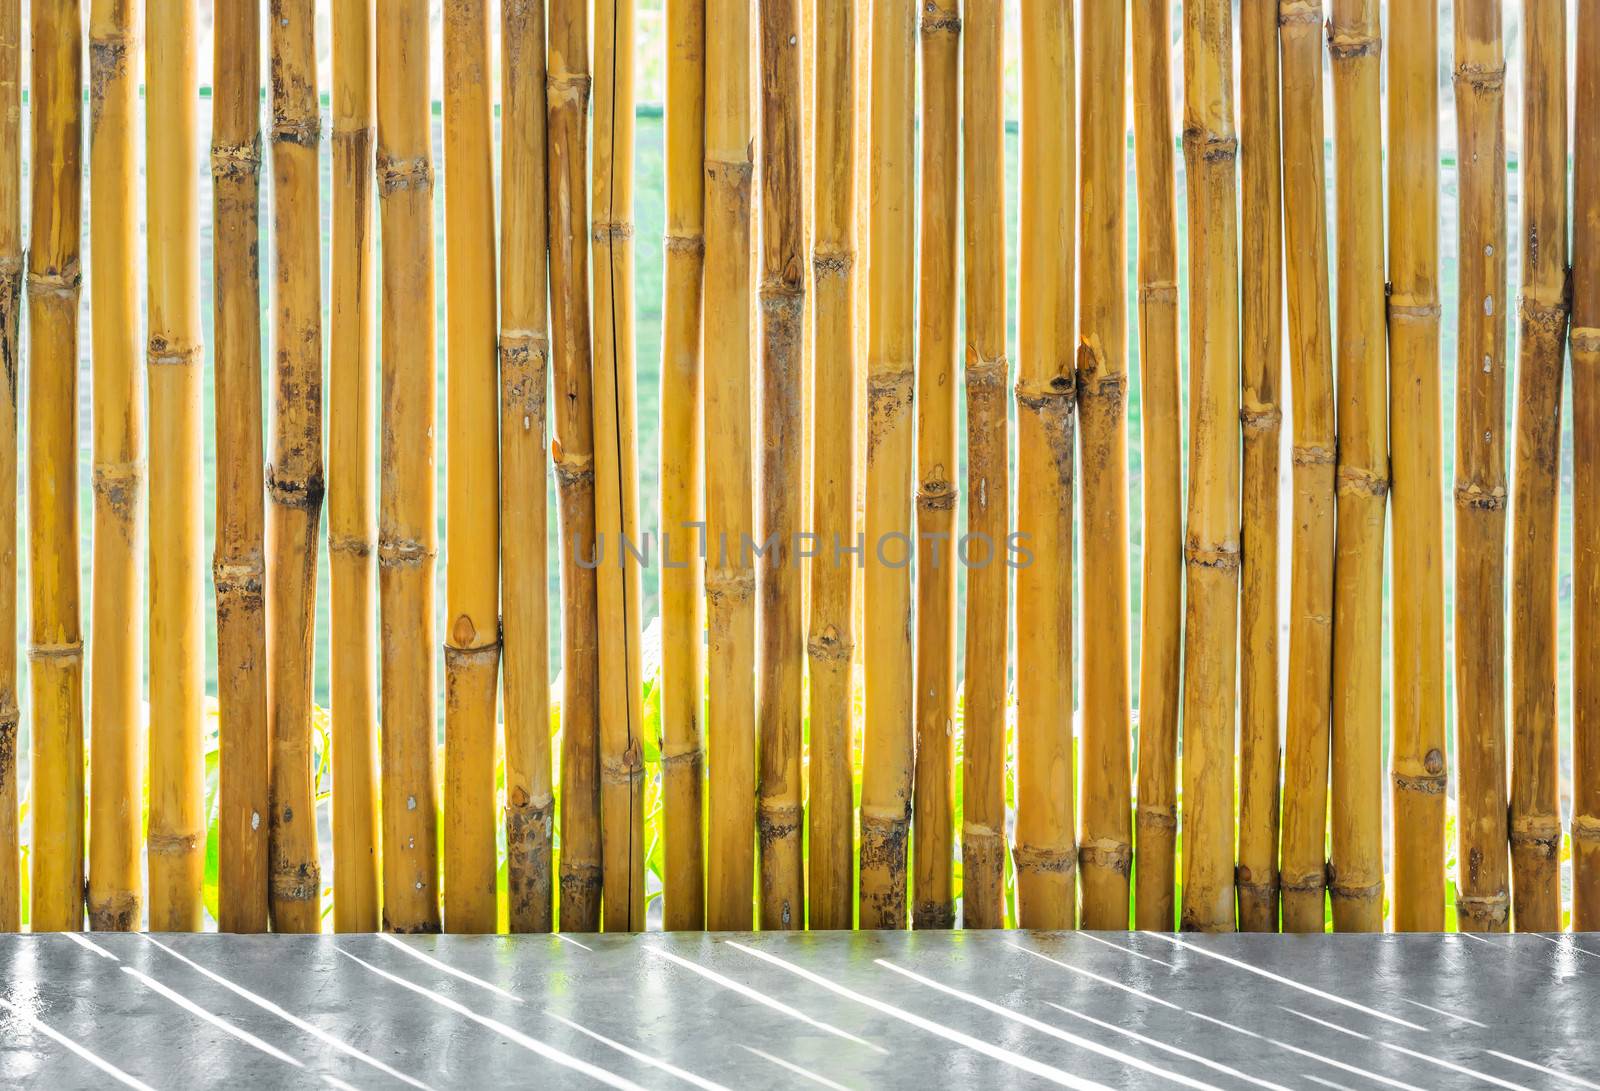 Bamboo fence by smuay